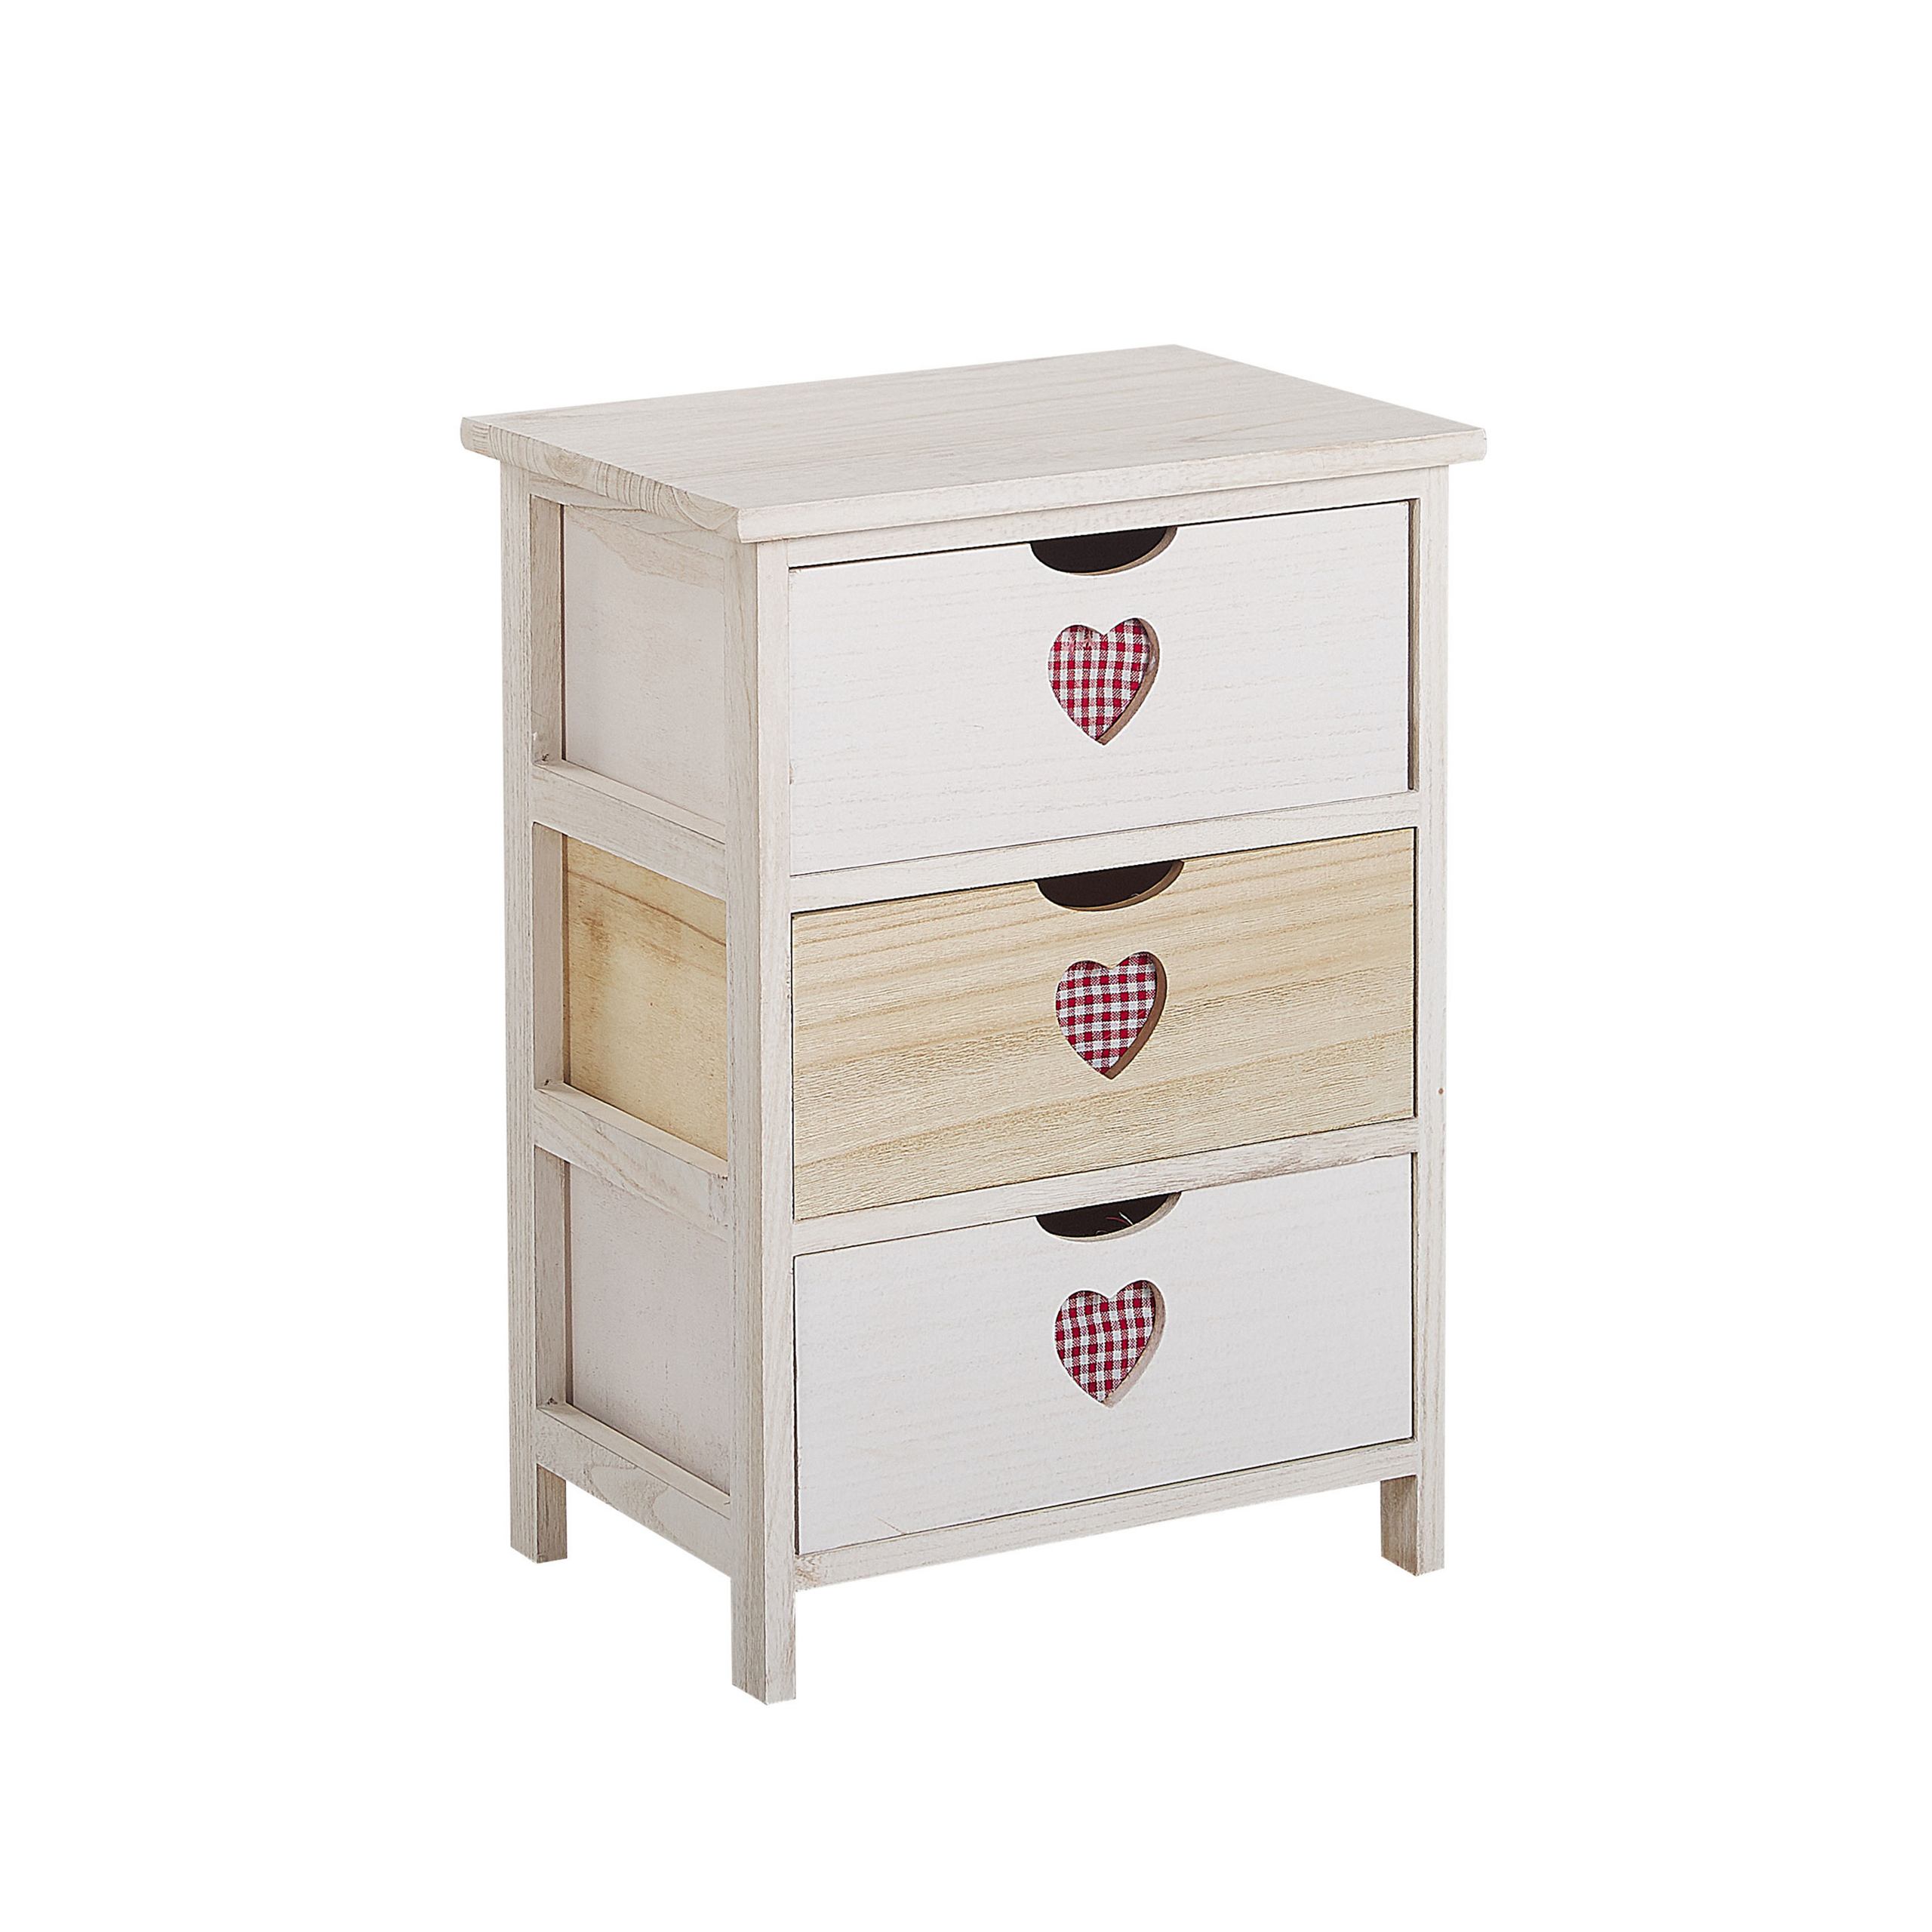 Beliani Bedside Table White with Light Wood MDF Solid Wood 3 Drawers Decorative Cutaway Hearts Boho Bedroom